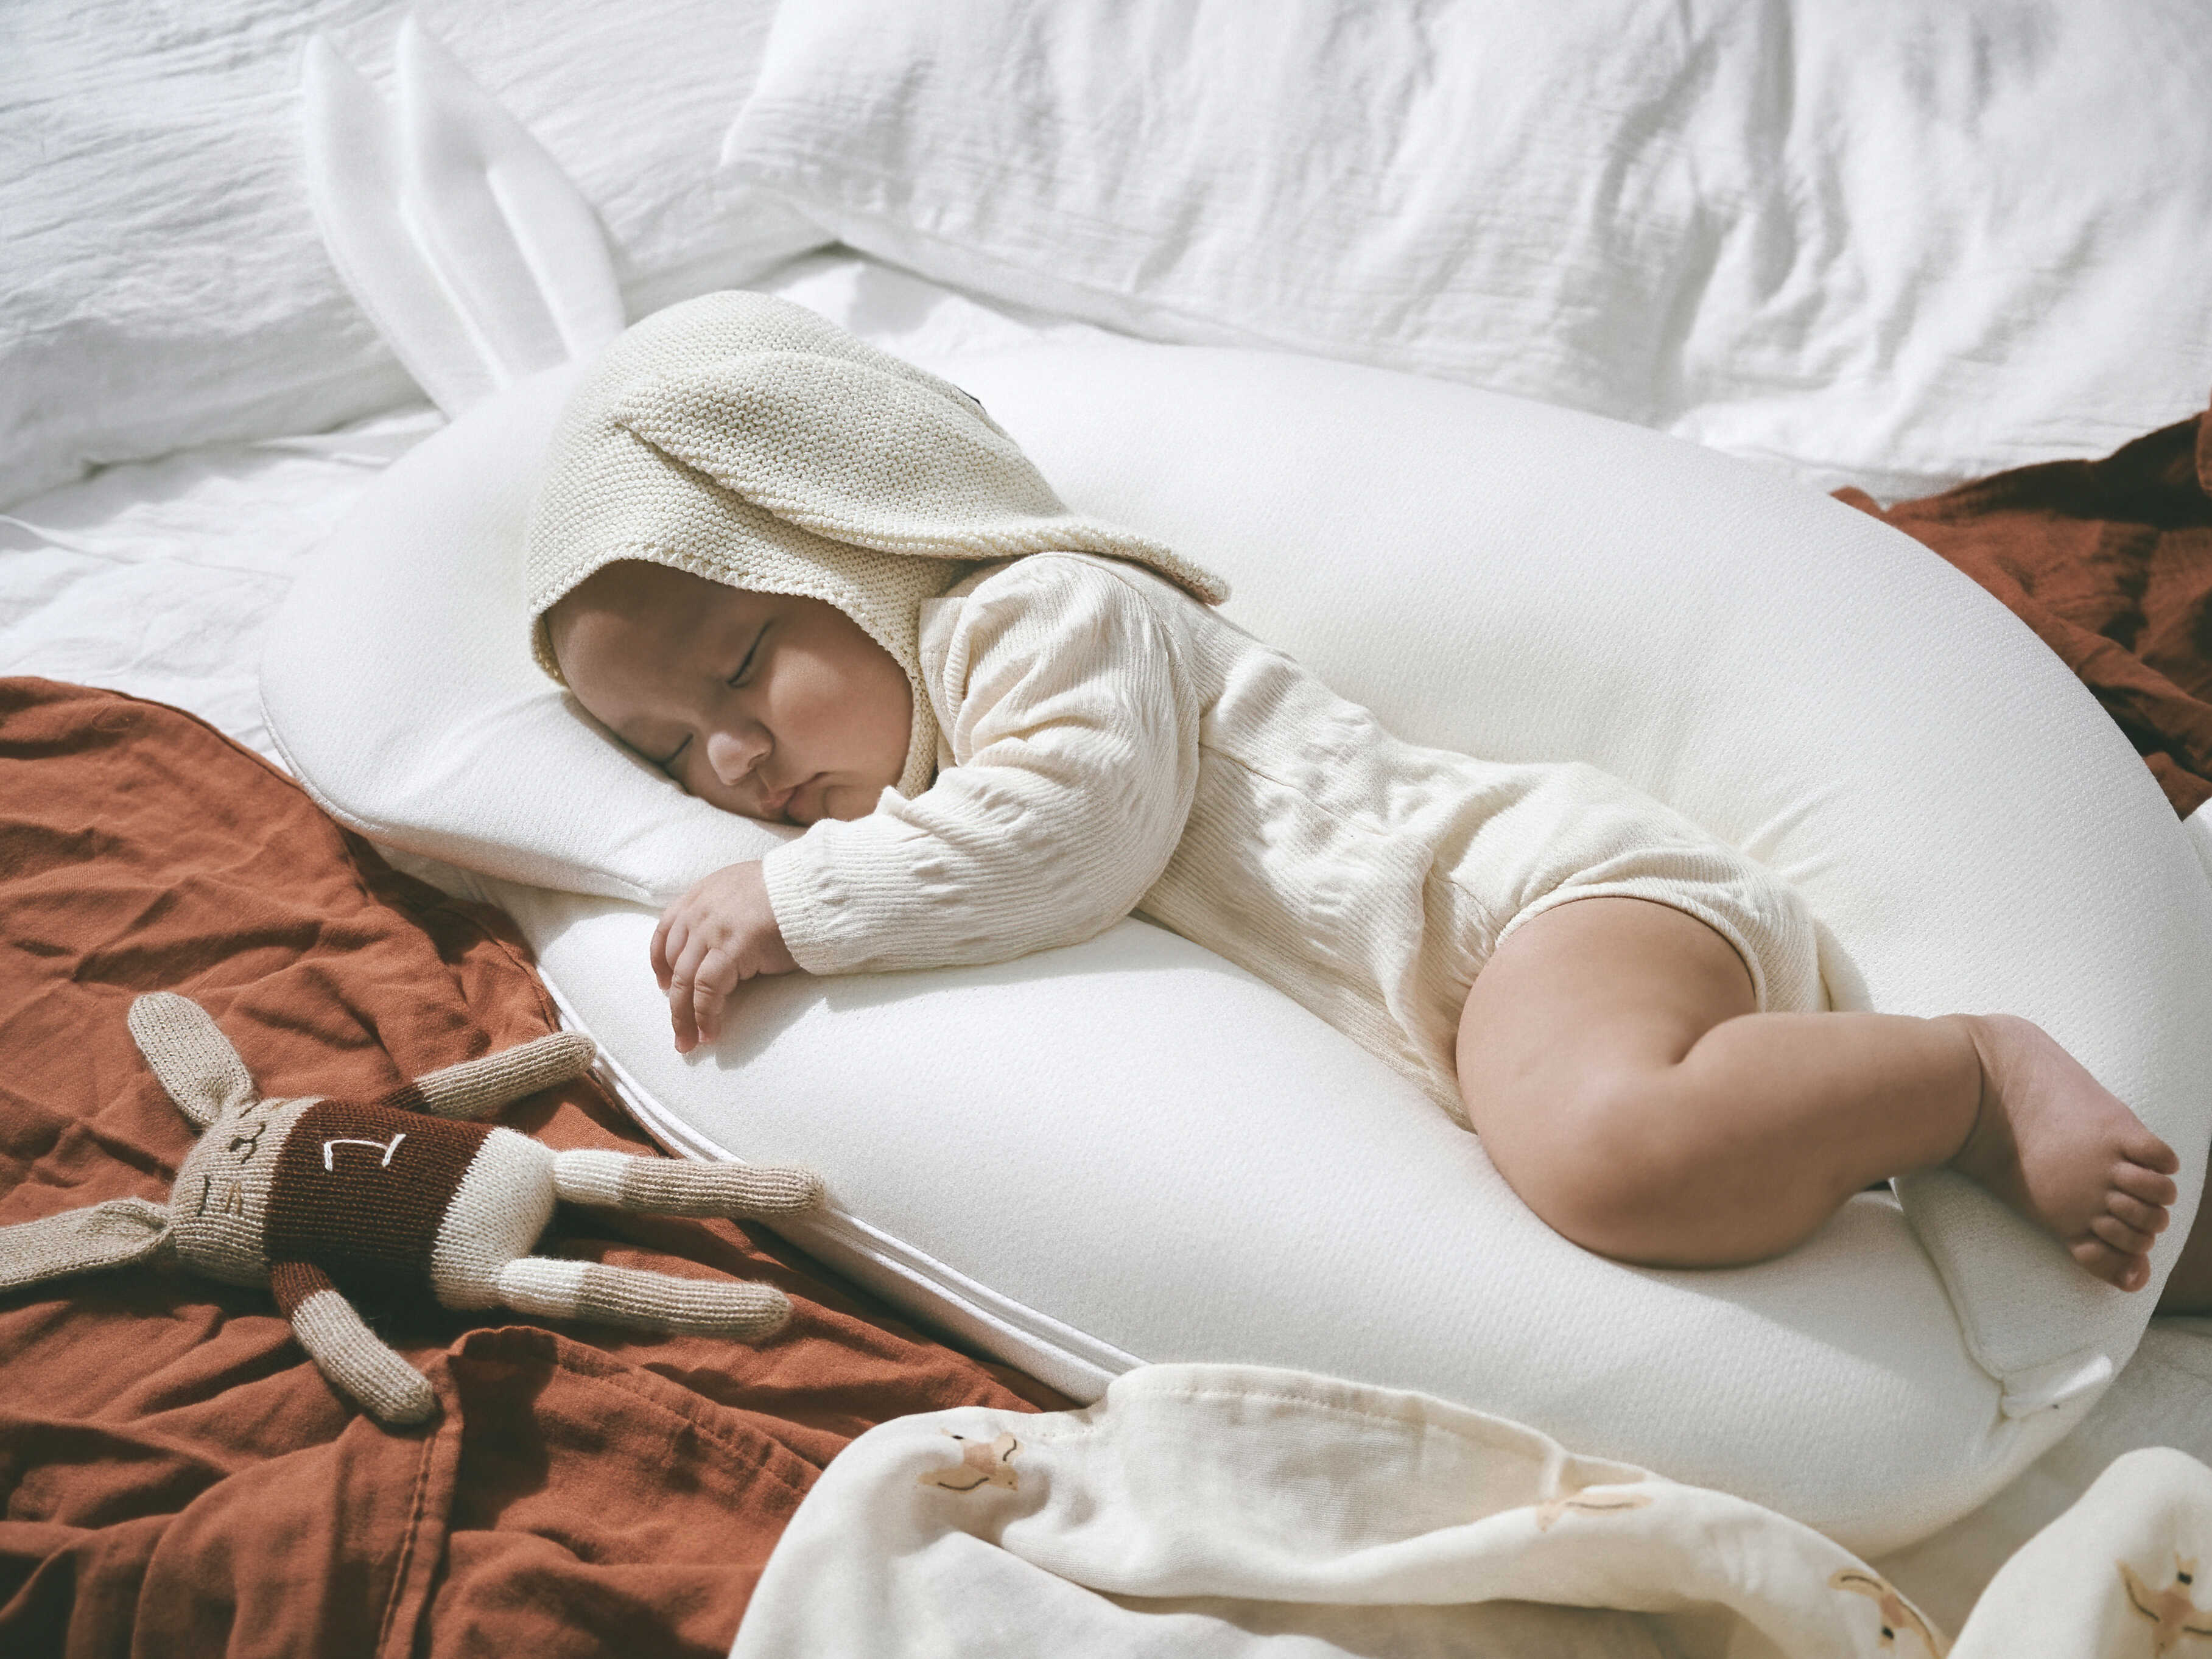 Head-to-the-side baby positioning pillow